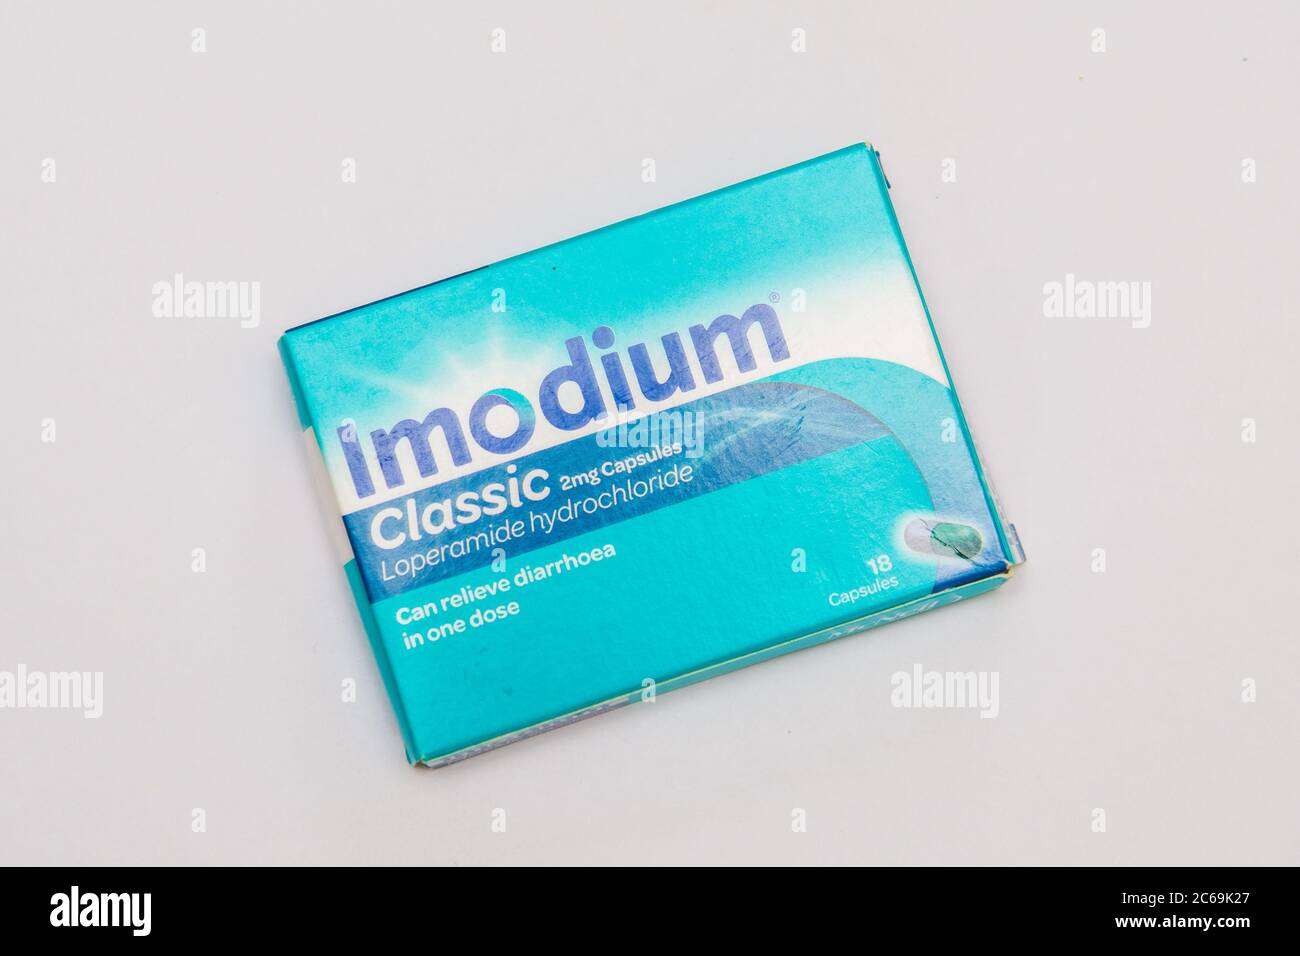 A package of Imodium medicine for heartburn, gas and bloating on an isolated background Stock Photo